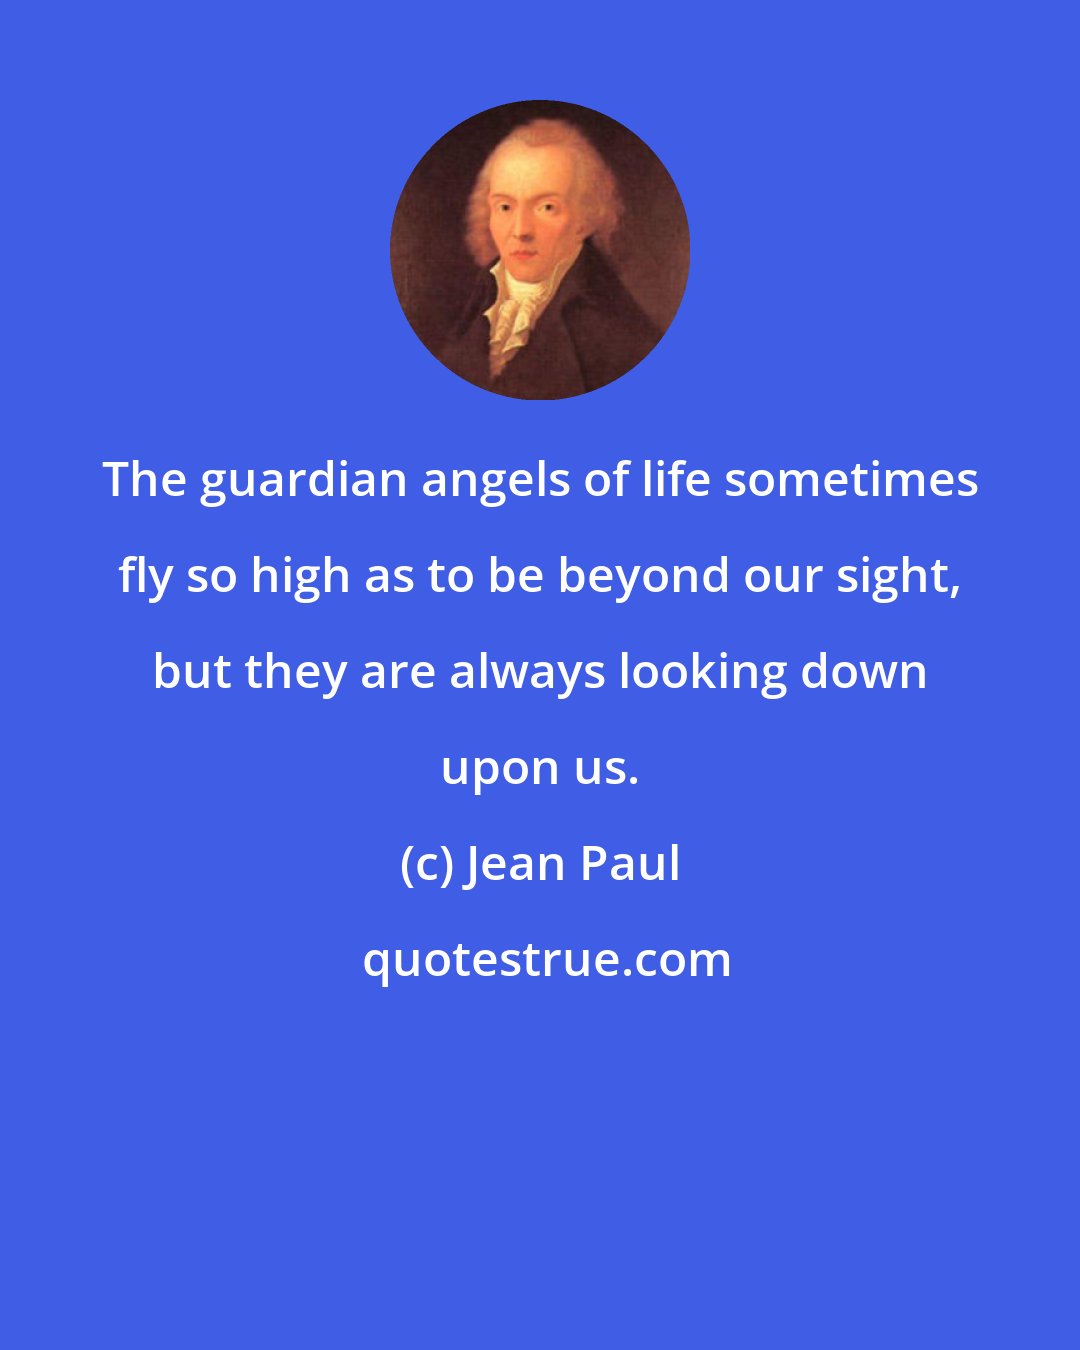 Jean Paul: The guardian angels of life sometimes fly so high as to be beyond our sight, but they are always looking down upon us.